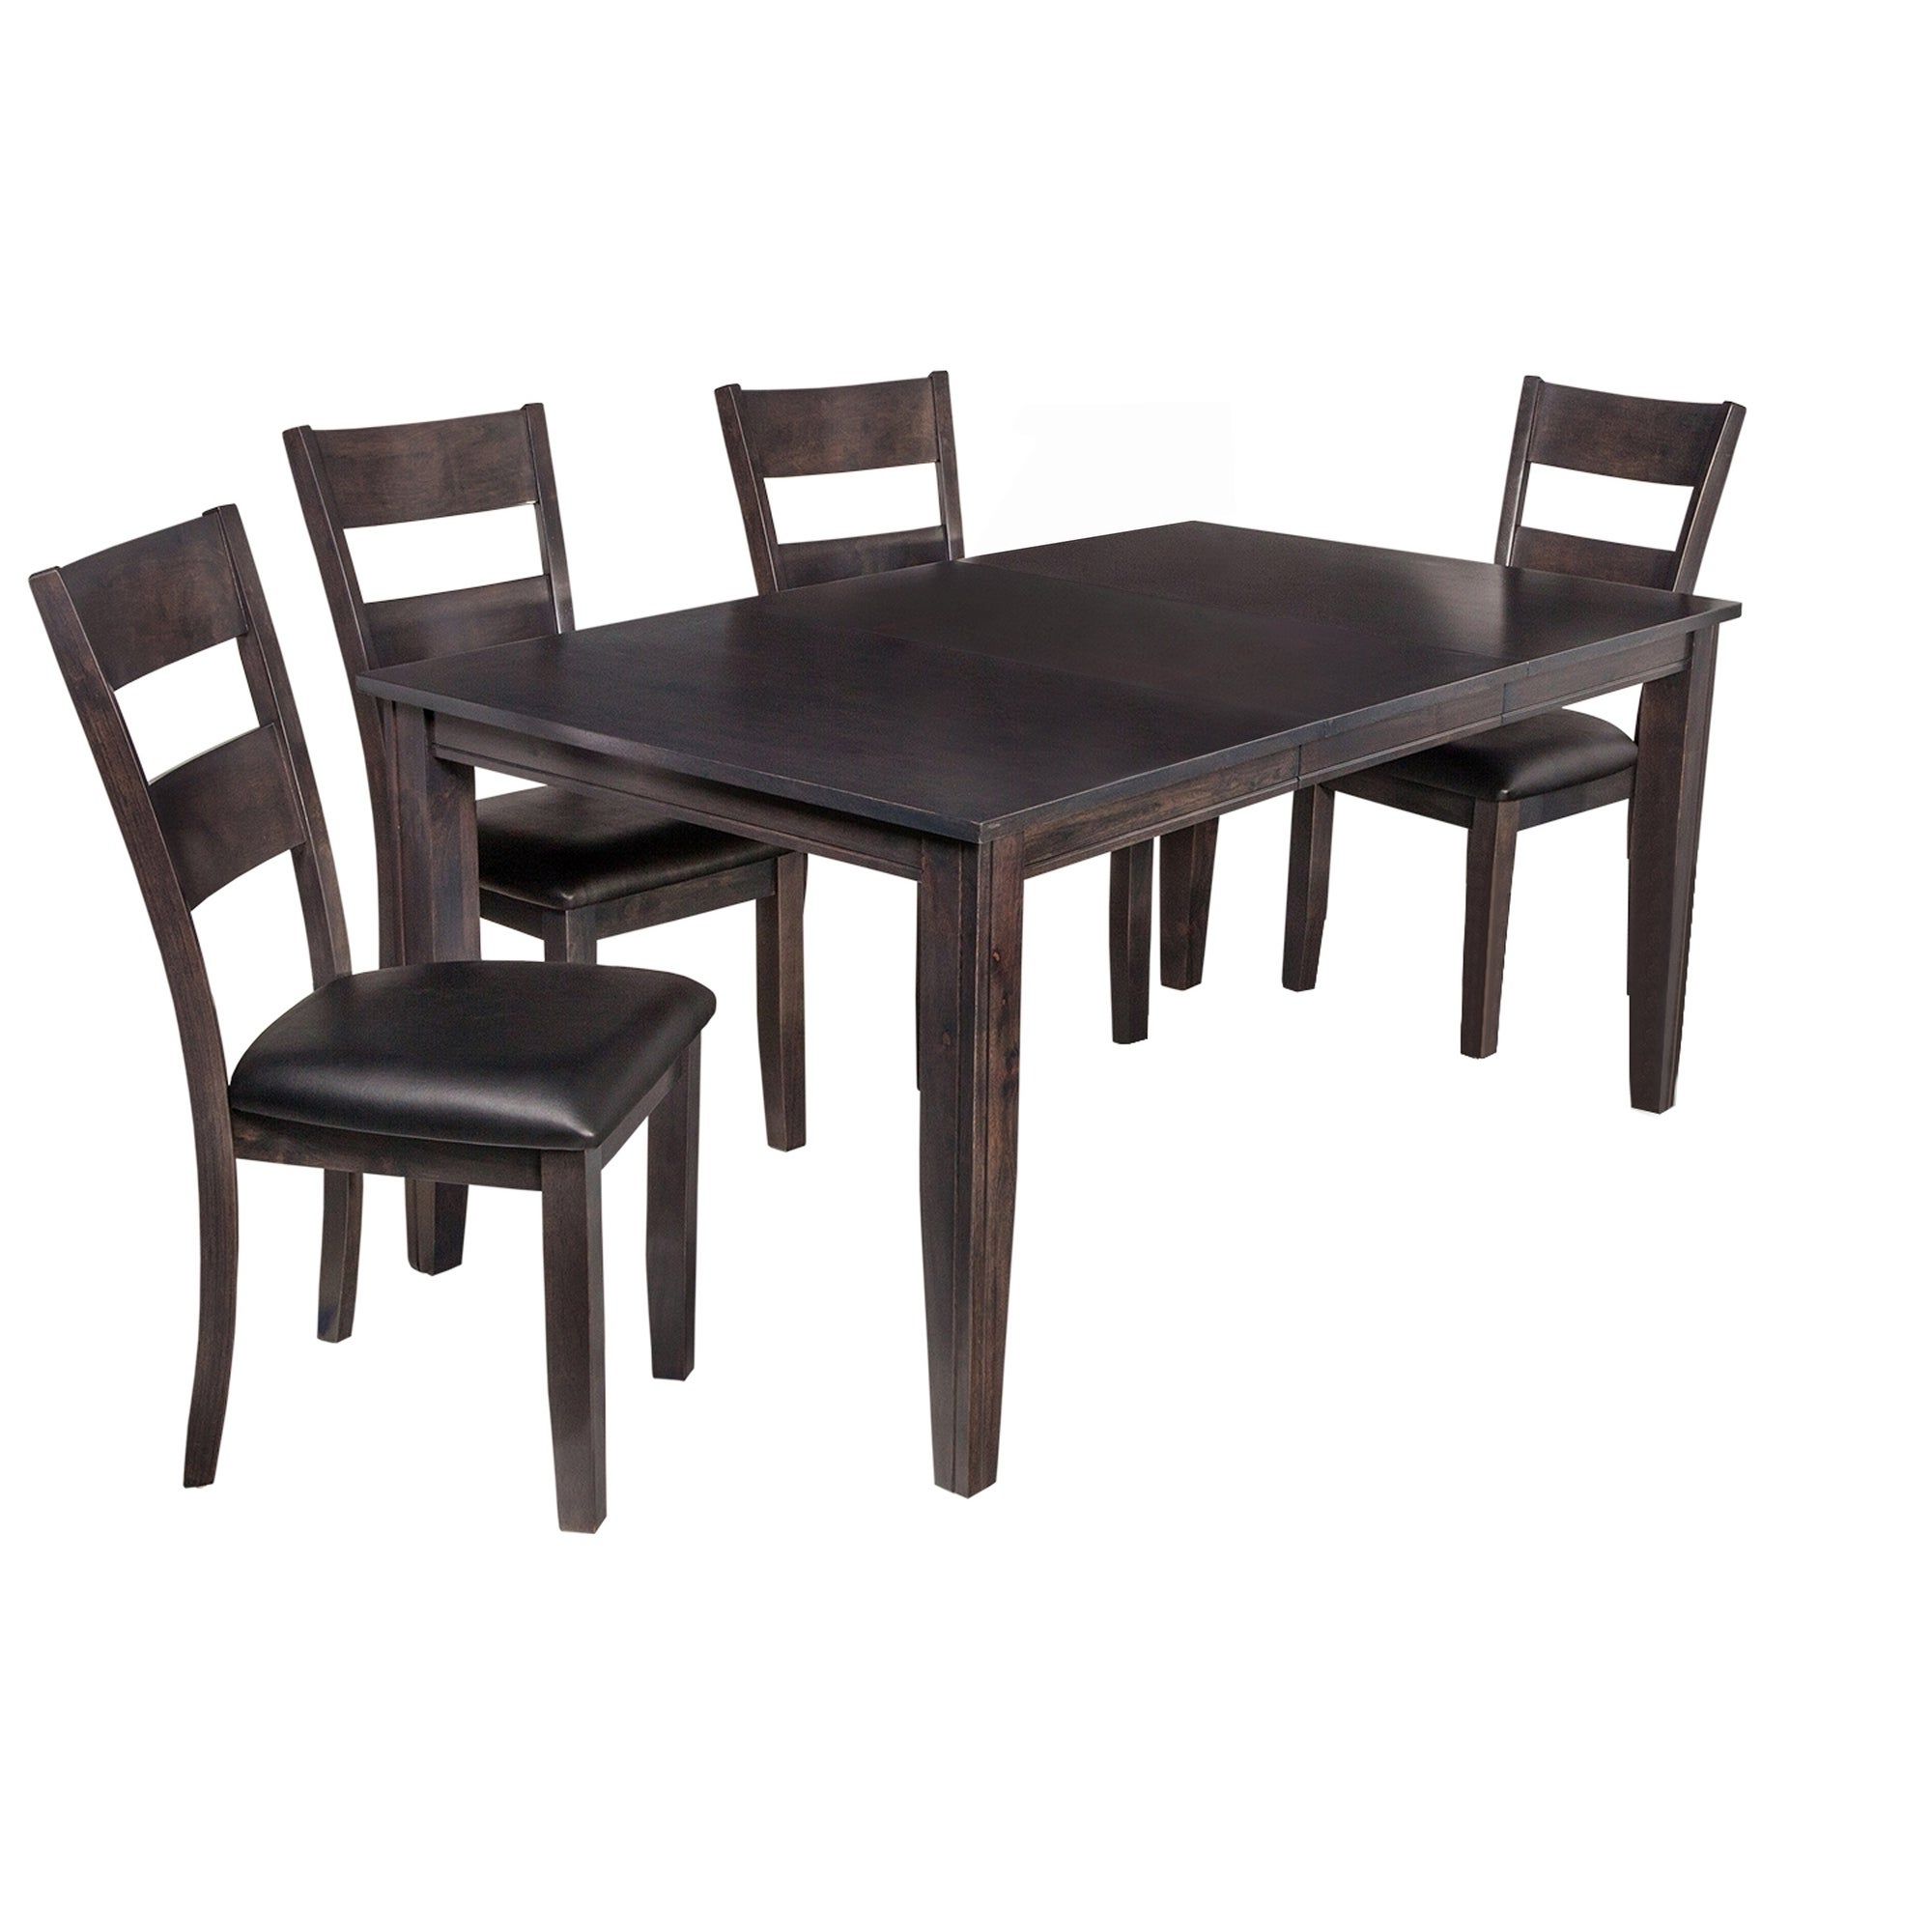 Shop 5 Piece Solid Wood Dining Set "aden", Modern Kitchen Table Set Pertaining To 2019 Adan 5 Piece Solid Wood Dining Sets (set Of 5) (View 4 of 25)